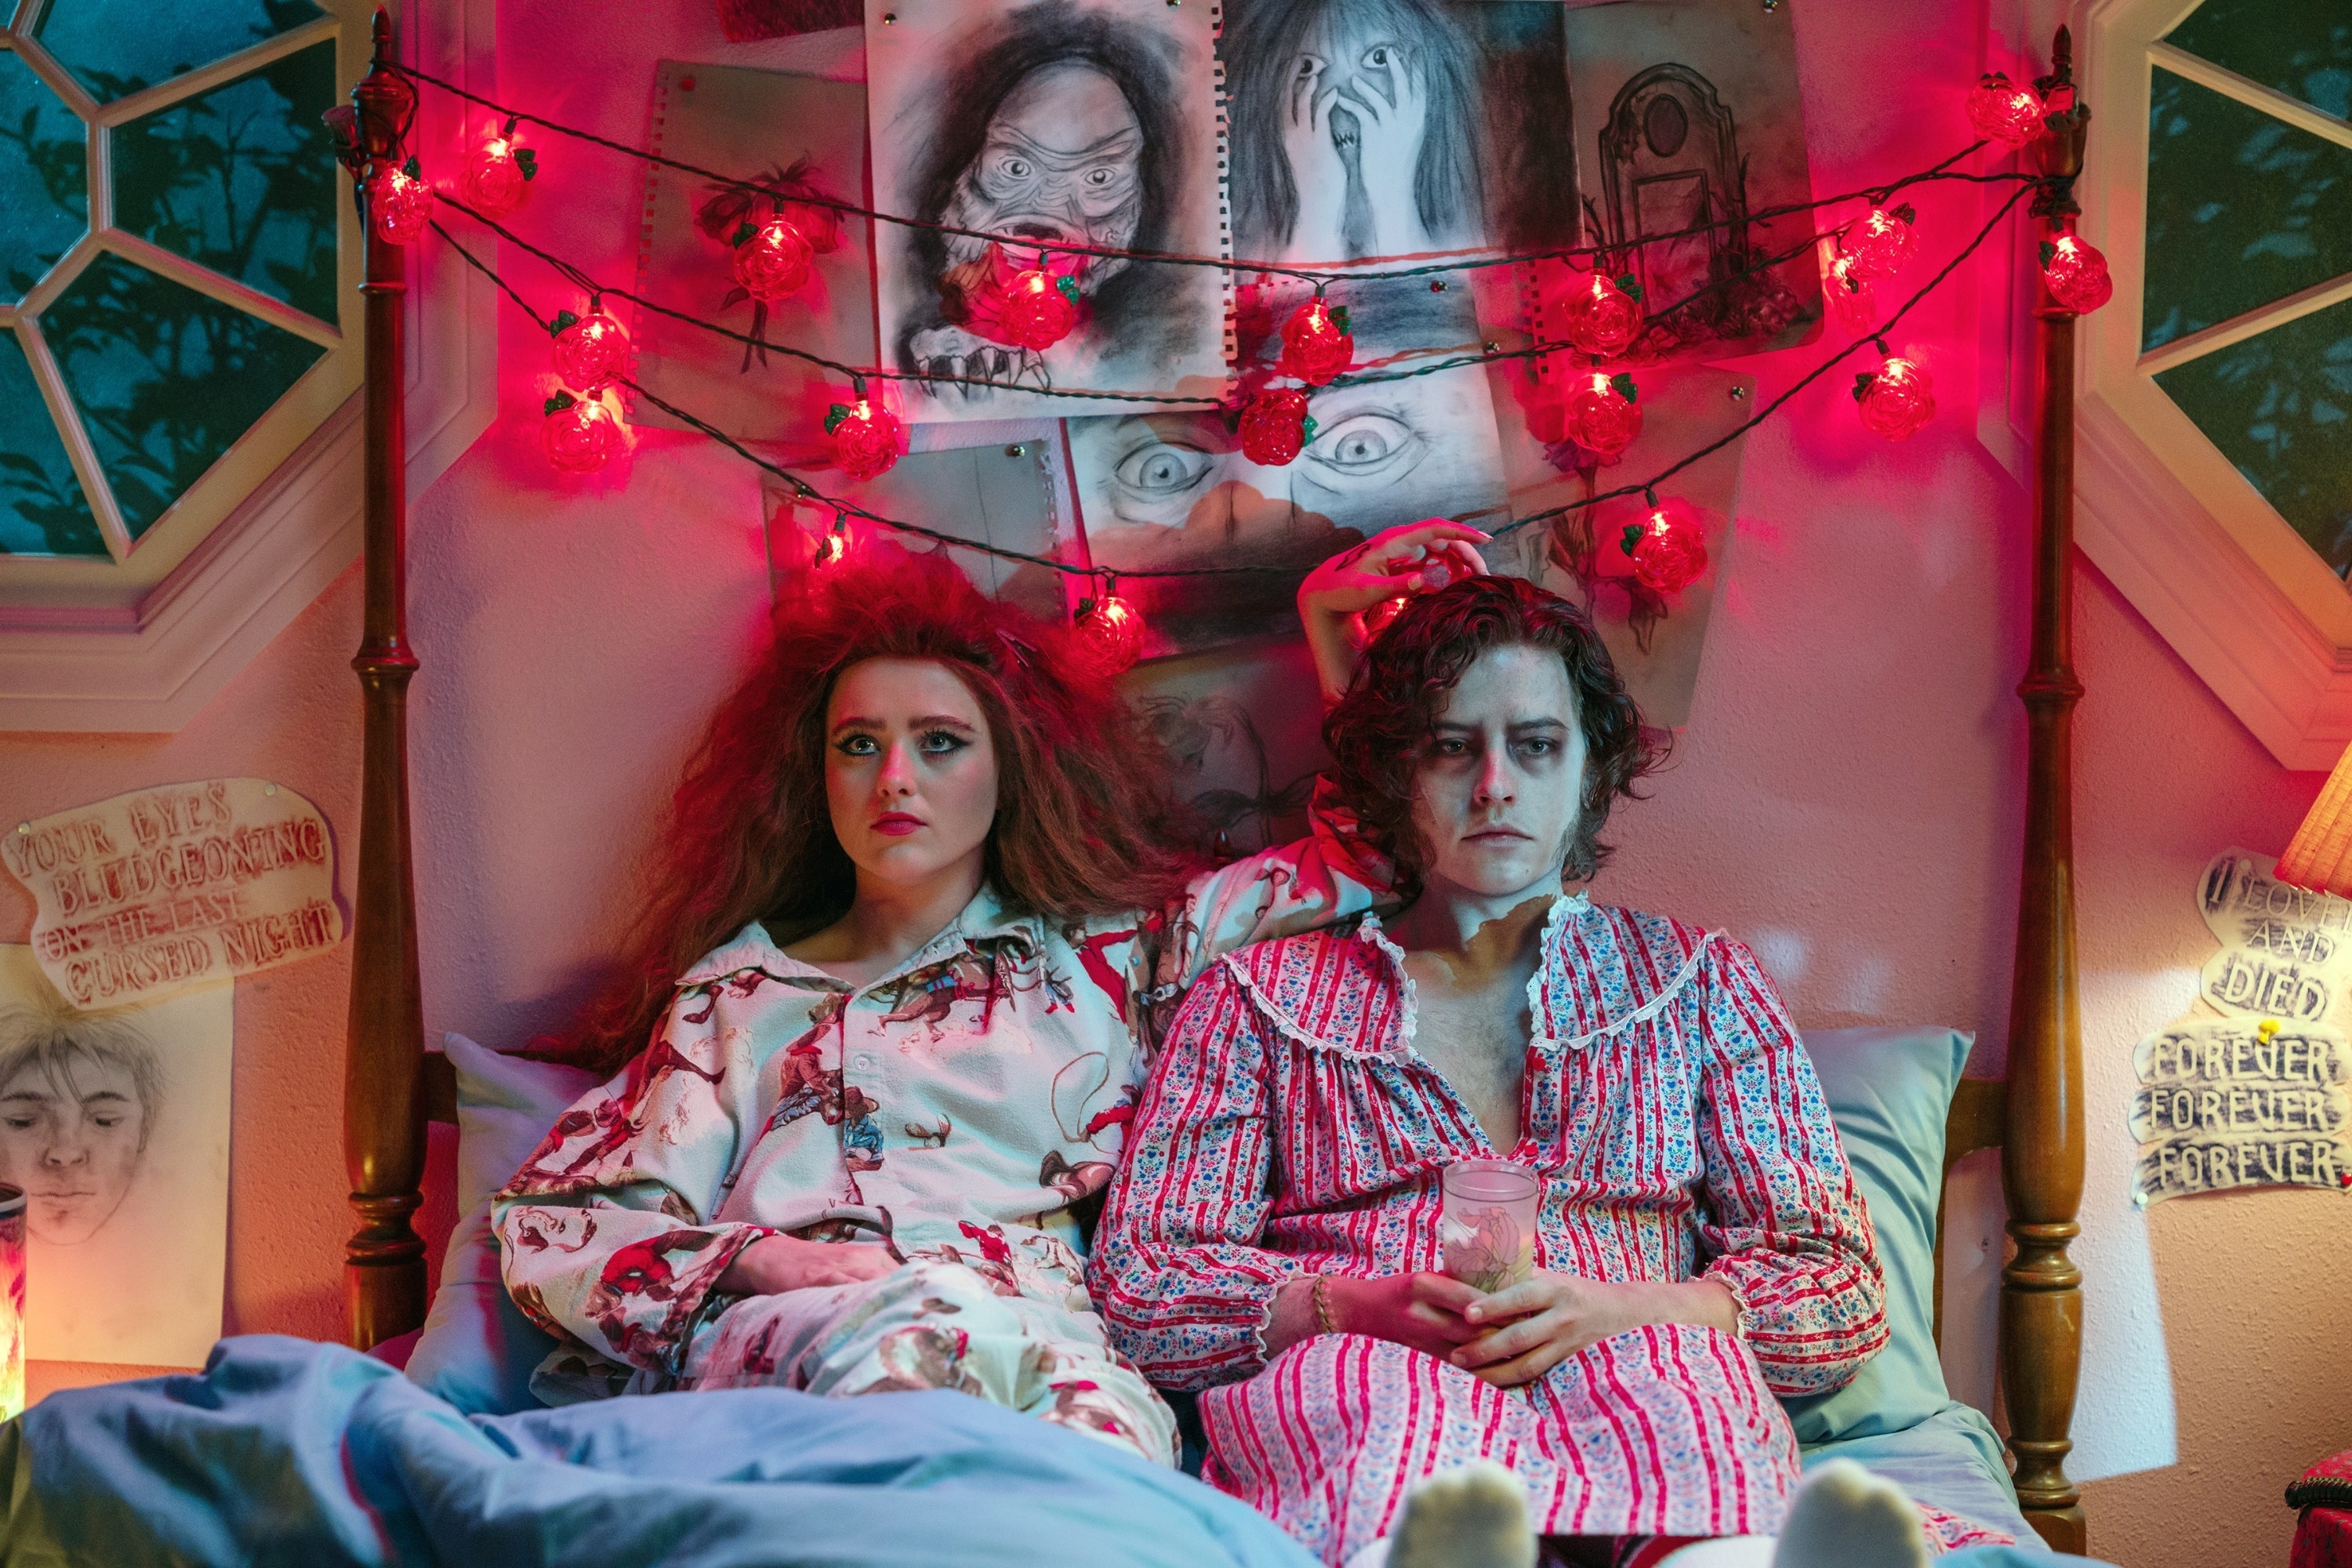 Cole Sprouse and Kathryn Newton in pajamas sit in bed with eclectic decor and string lights